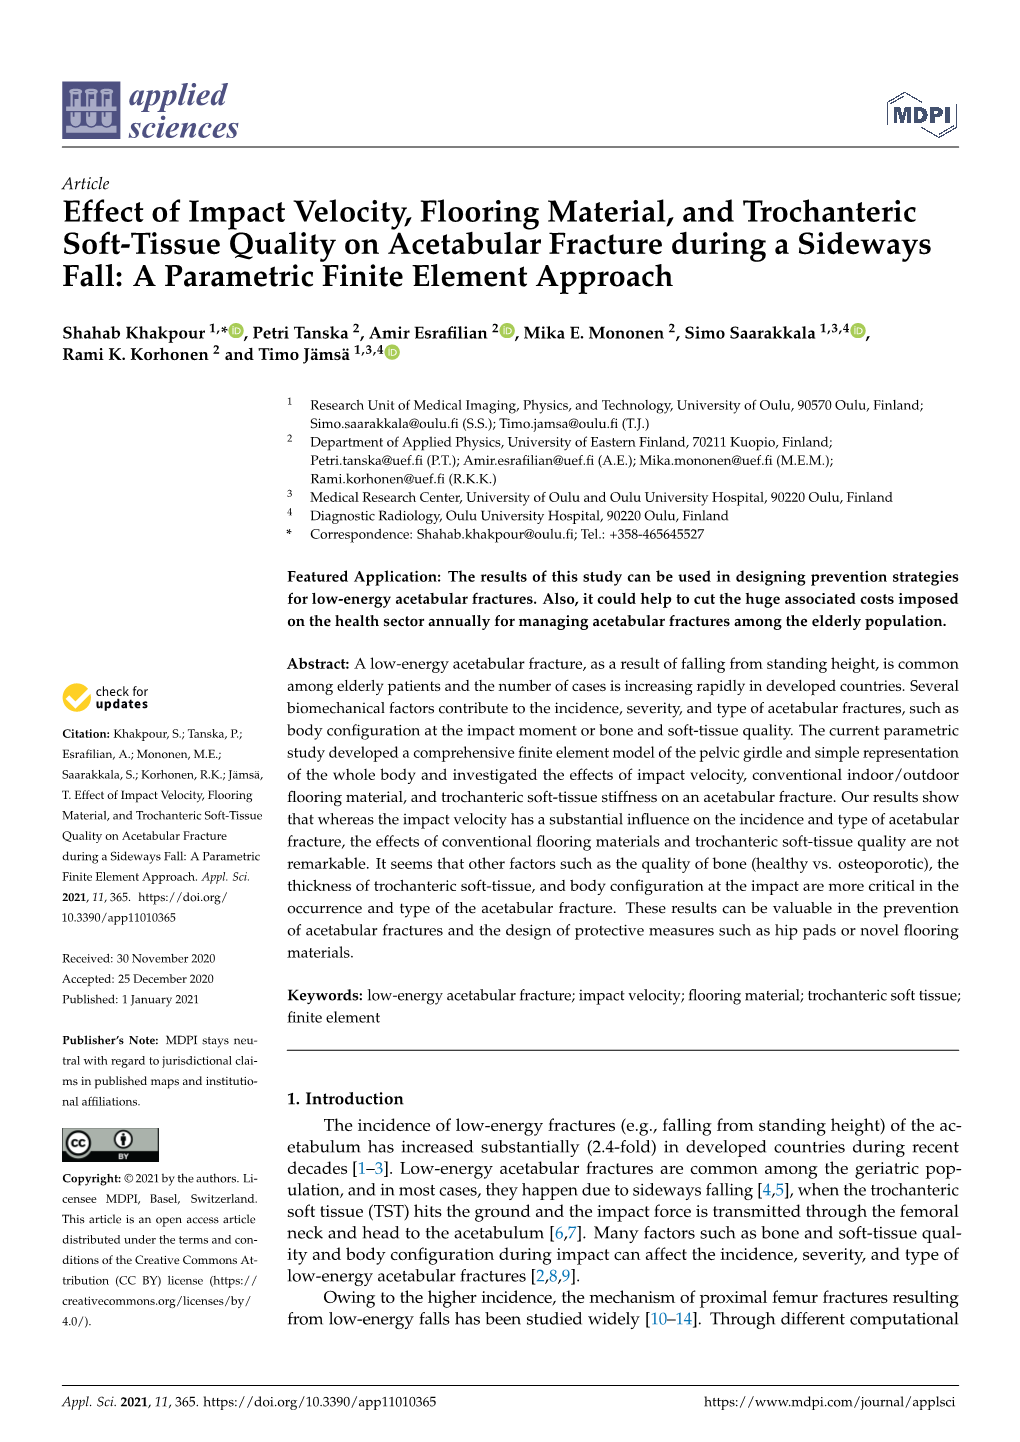 Effect of Impact Velocity, Flooring Material, and Trochanteric Soft-Tissue Quality on Acetabular Fracture During a Sideways Fall: a Parametric Finite Element Approach